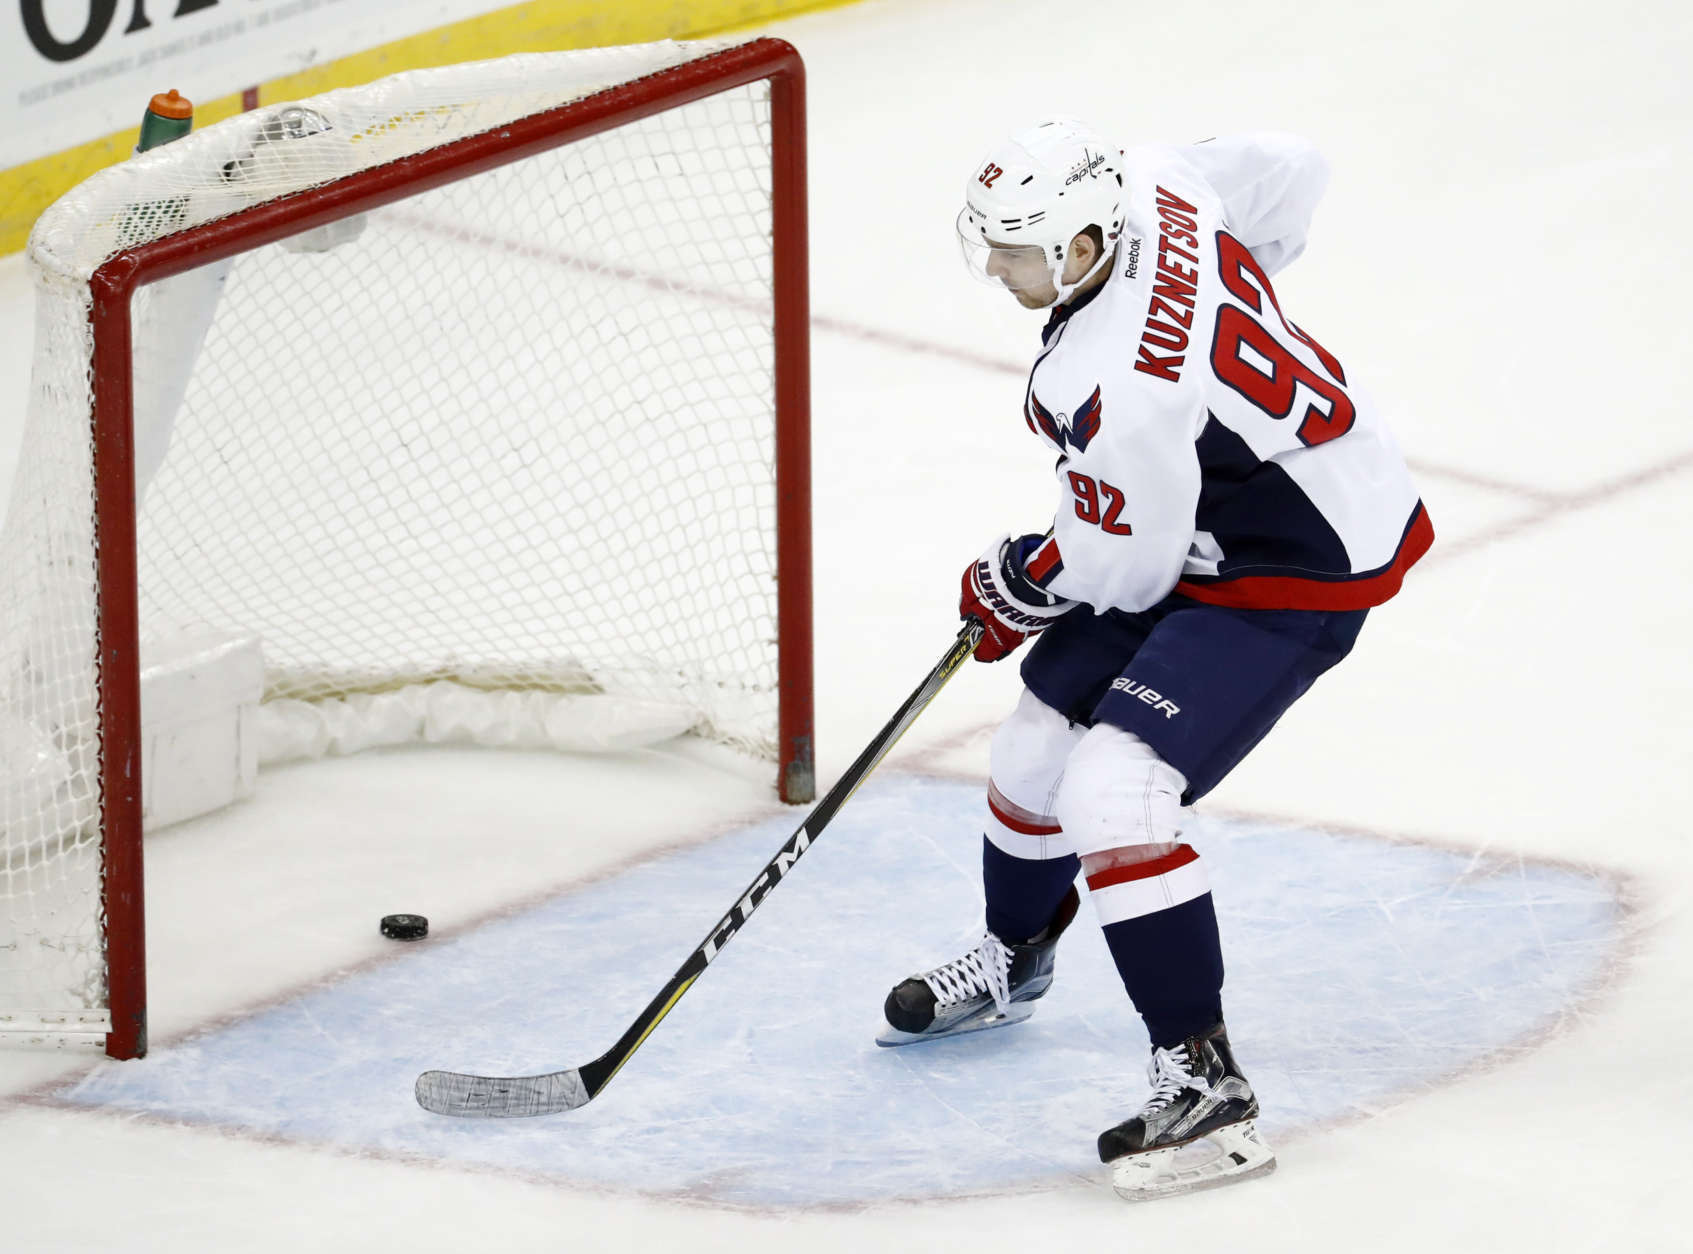 Washington Capitals center Evgeny Kuznetsov, of Russia, scores on an open net during the third period of an NHL hockey game against the New Jersey Devils, Thursday, Jan. 26, 2017, in Newark, N.J. The Capitals won 5-2. (AP Photo/Julio Cortez)